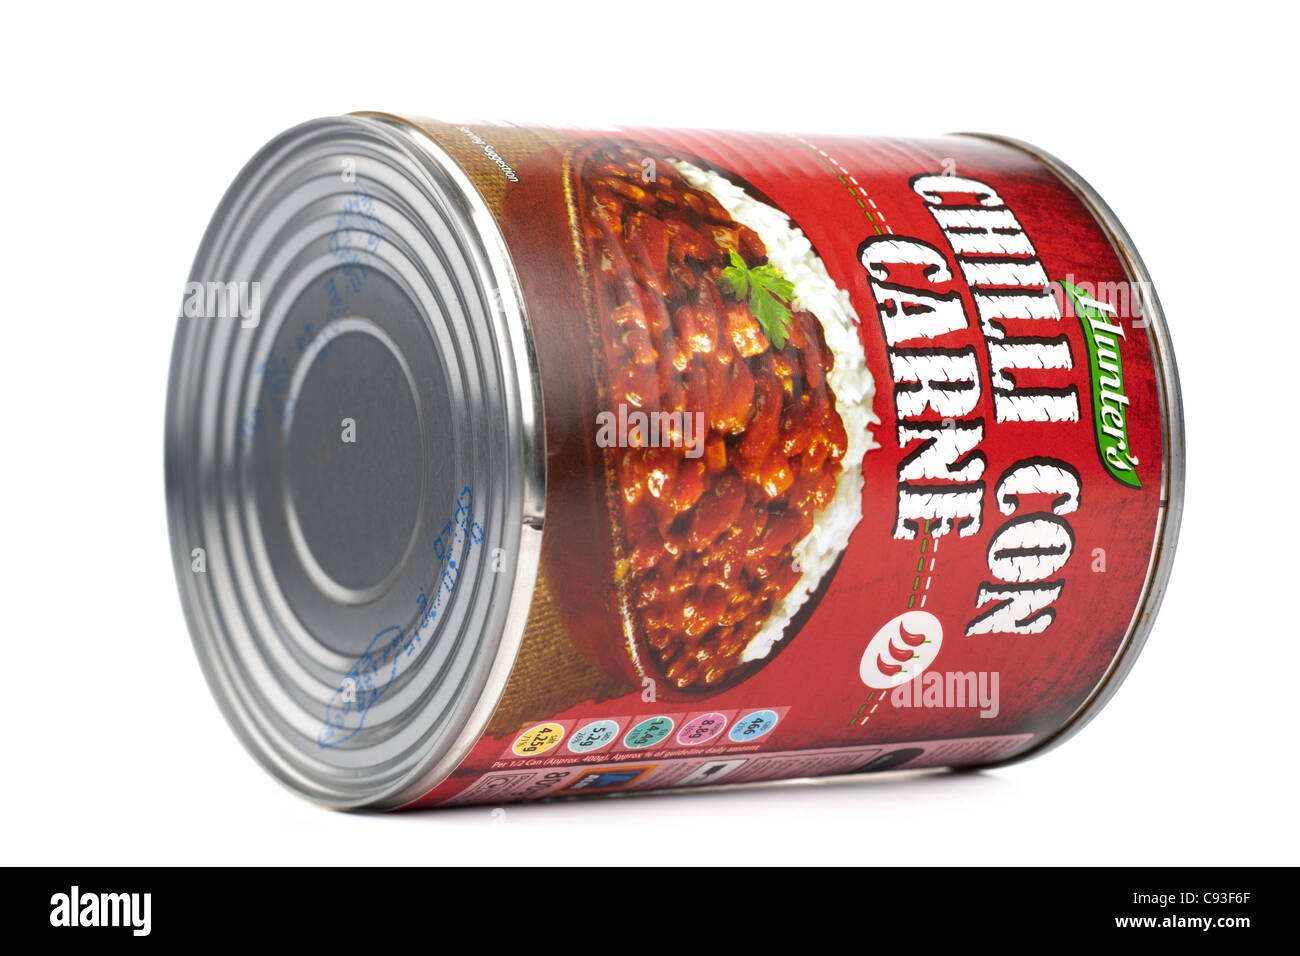 800g can of Hunters Chilli con carne laid on its side Stock Photo